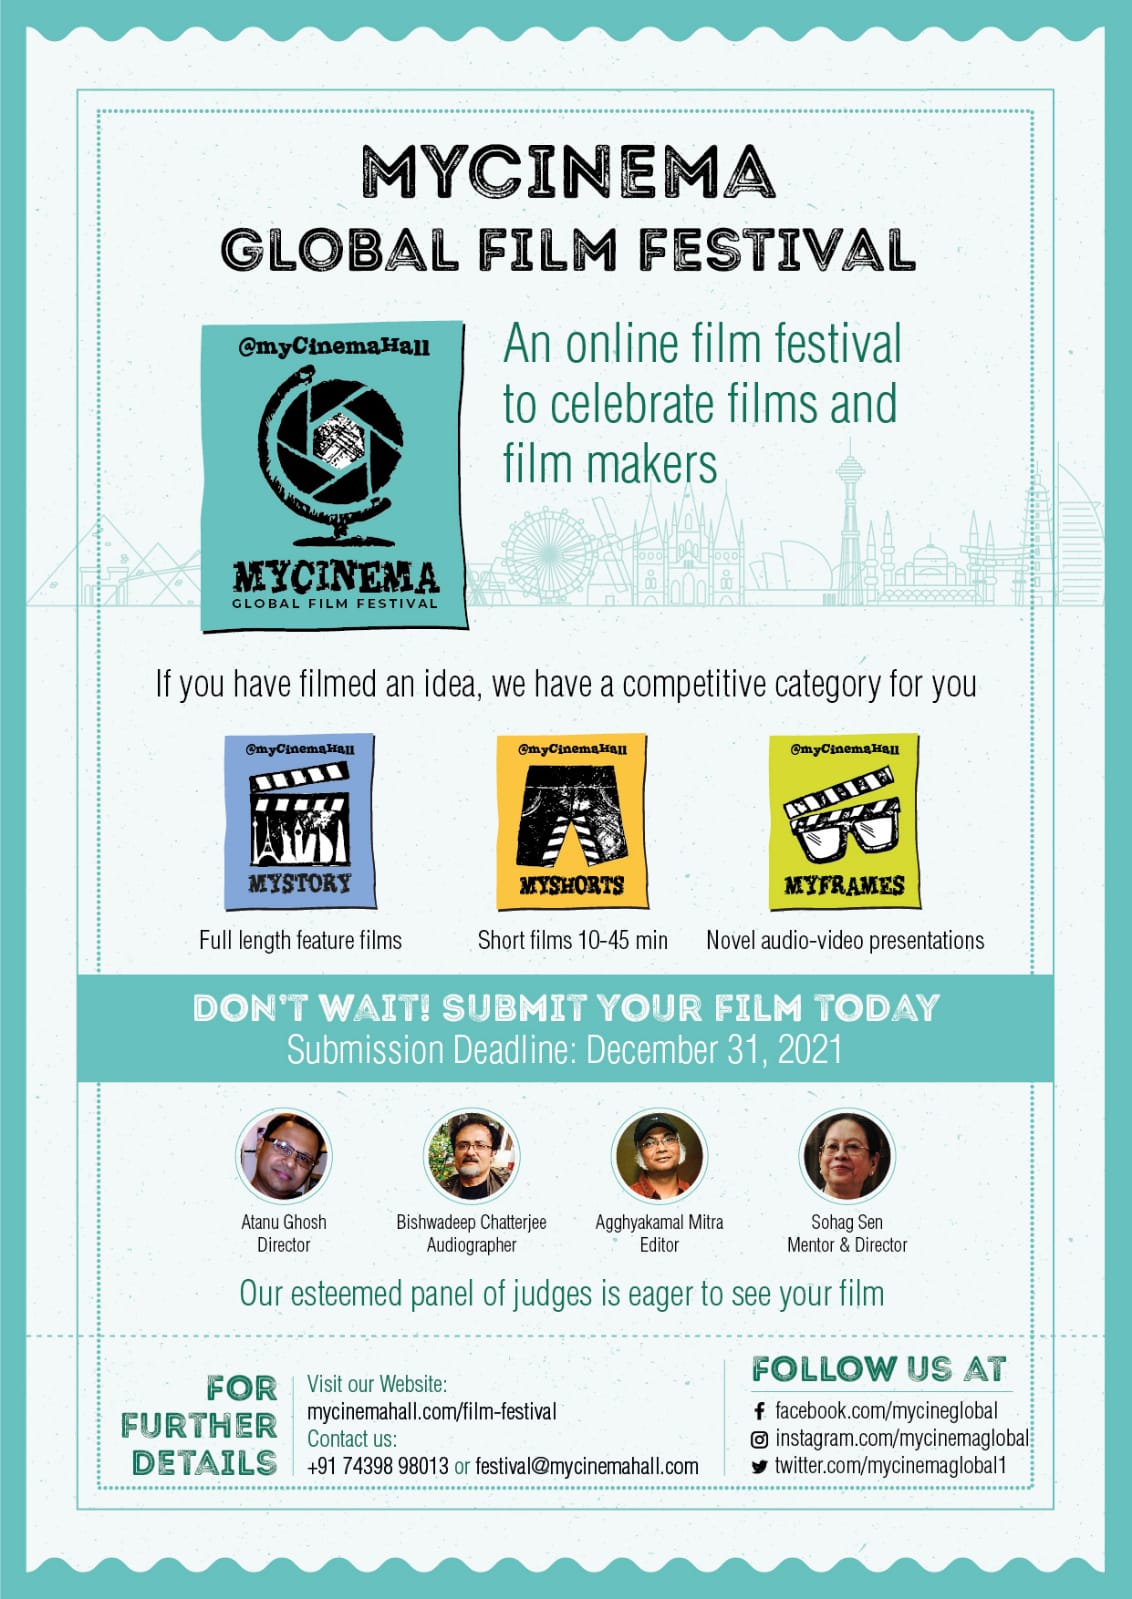 Virtual Film Festival 'My Cinema Global Film Festival' is about to start